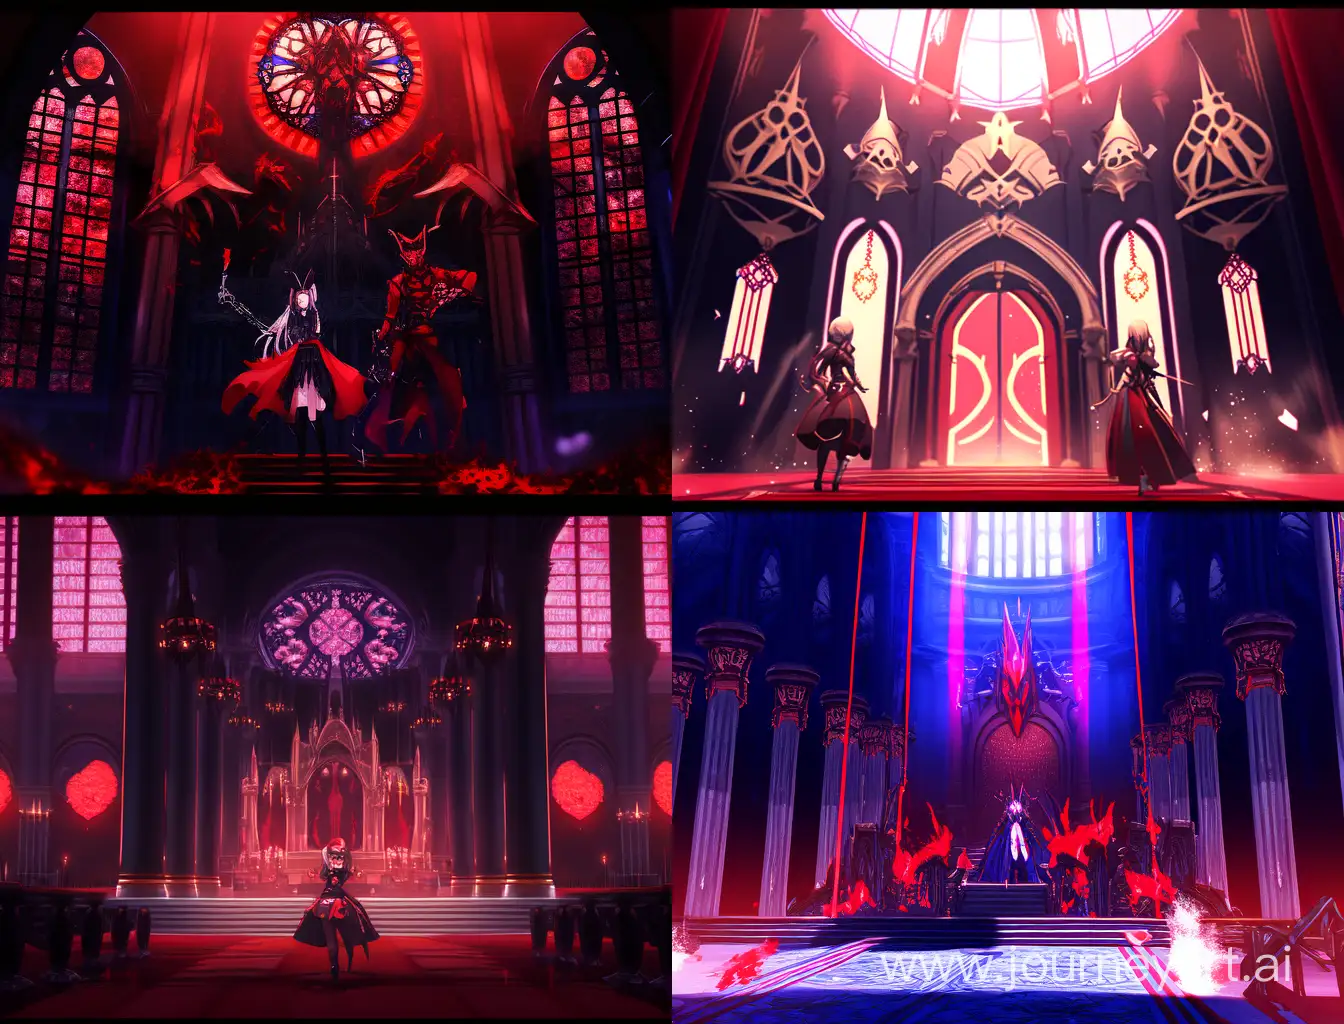 [royal] in HoloGothic style, featuring [red] and [black] holographic gothic arches and figures